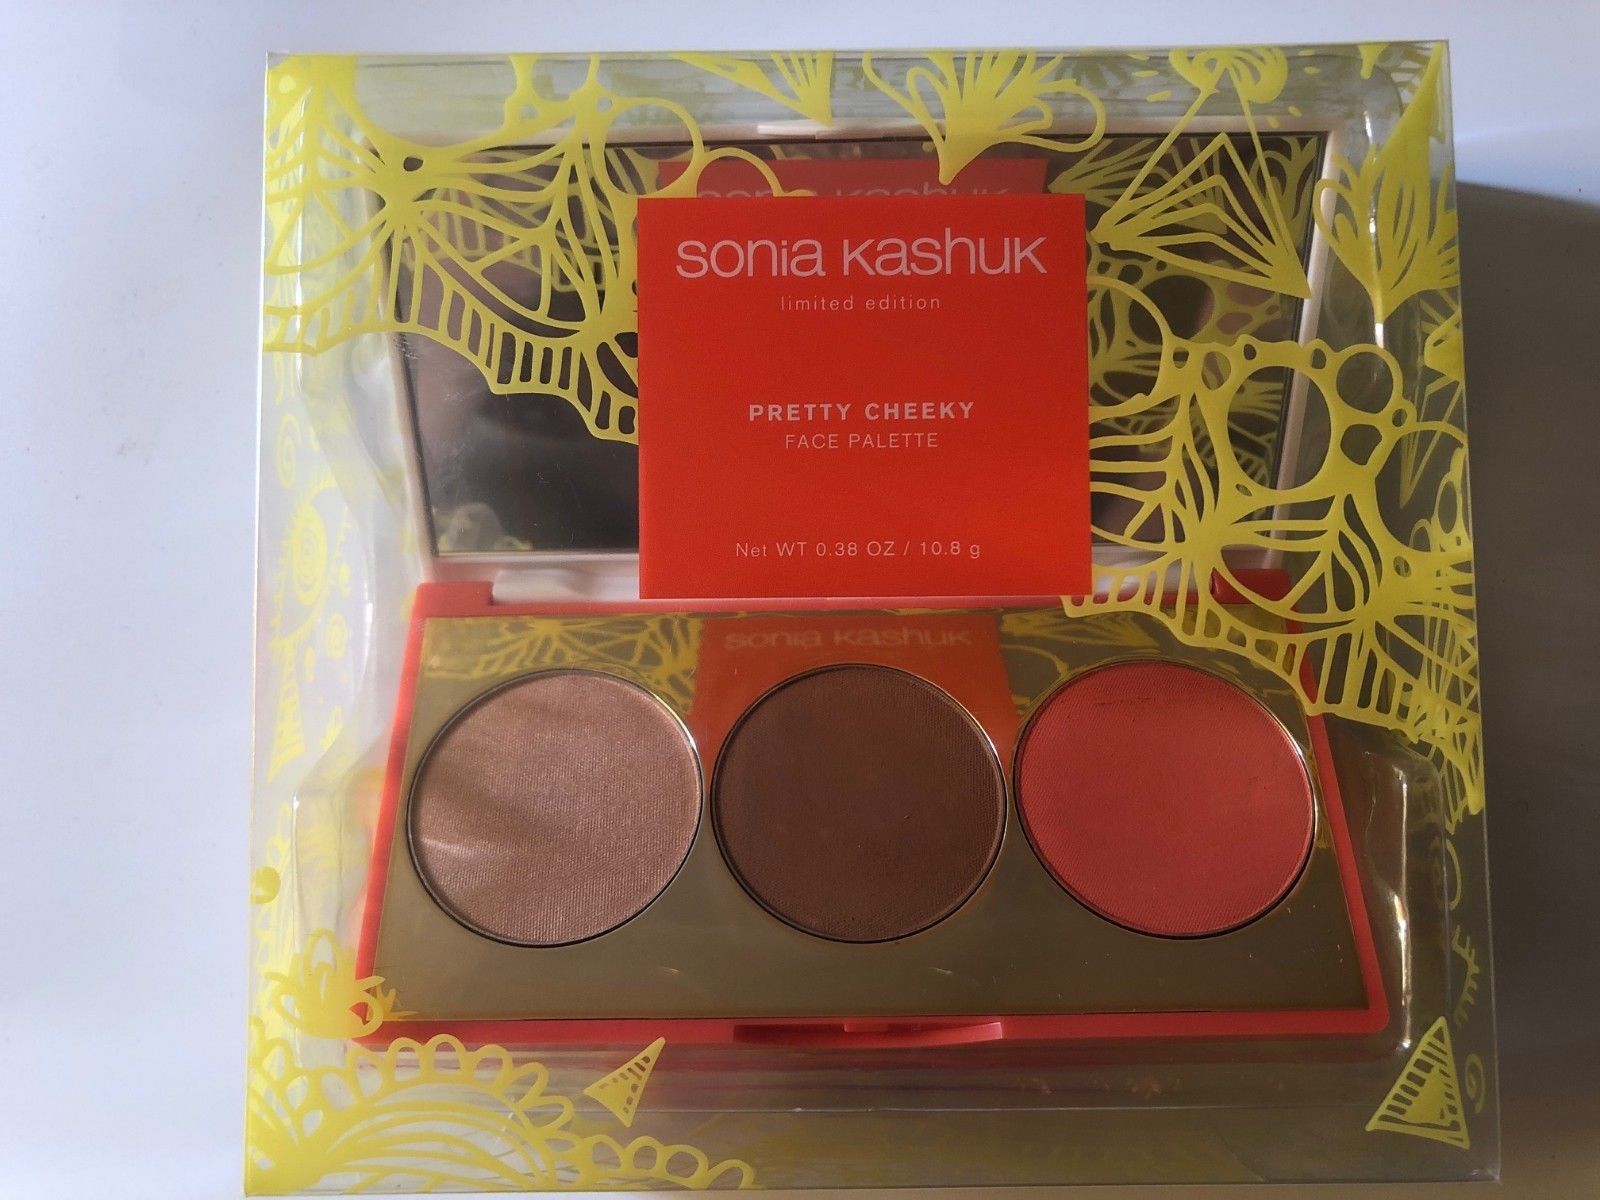 Sonia Kashuk Limited Edition Pretty Cheeky Face Palette - $15.99